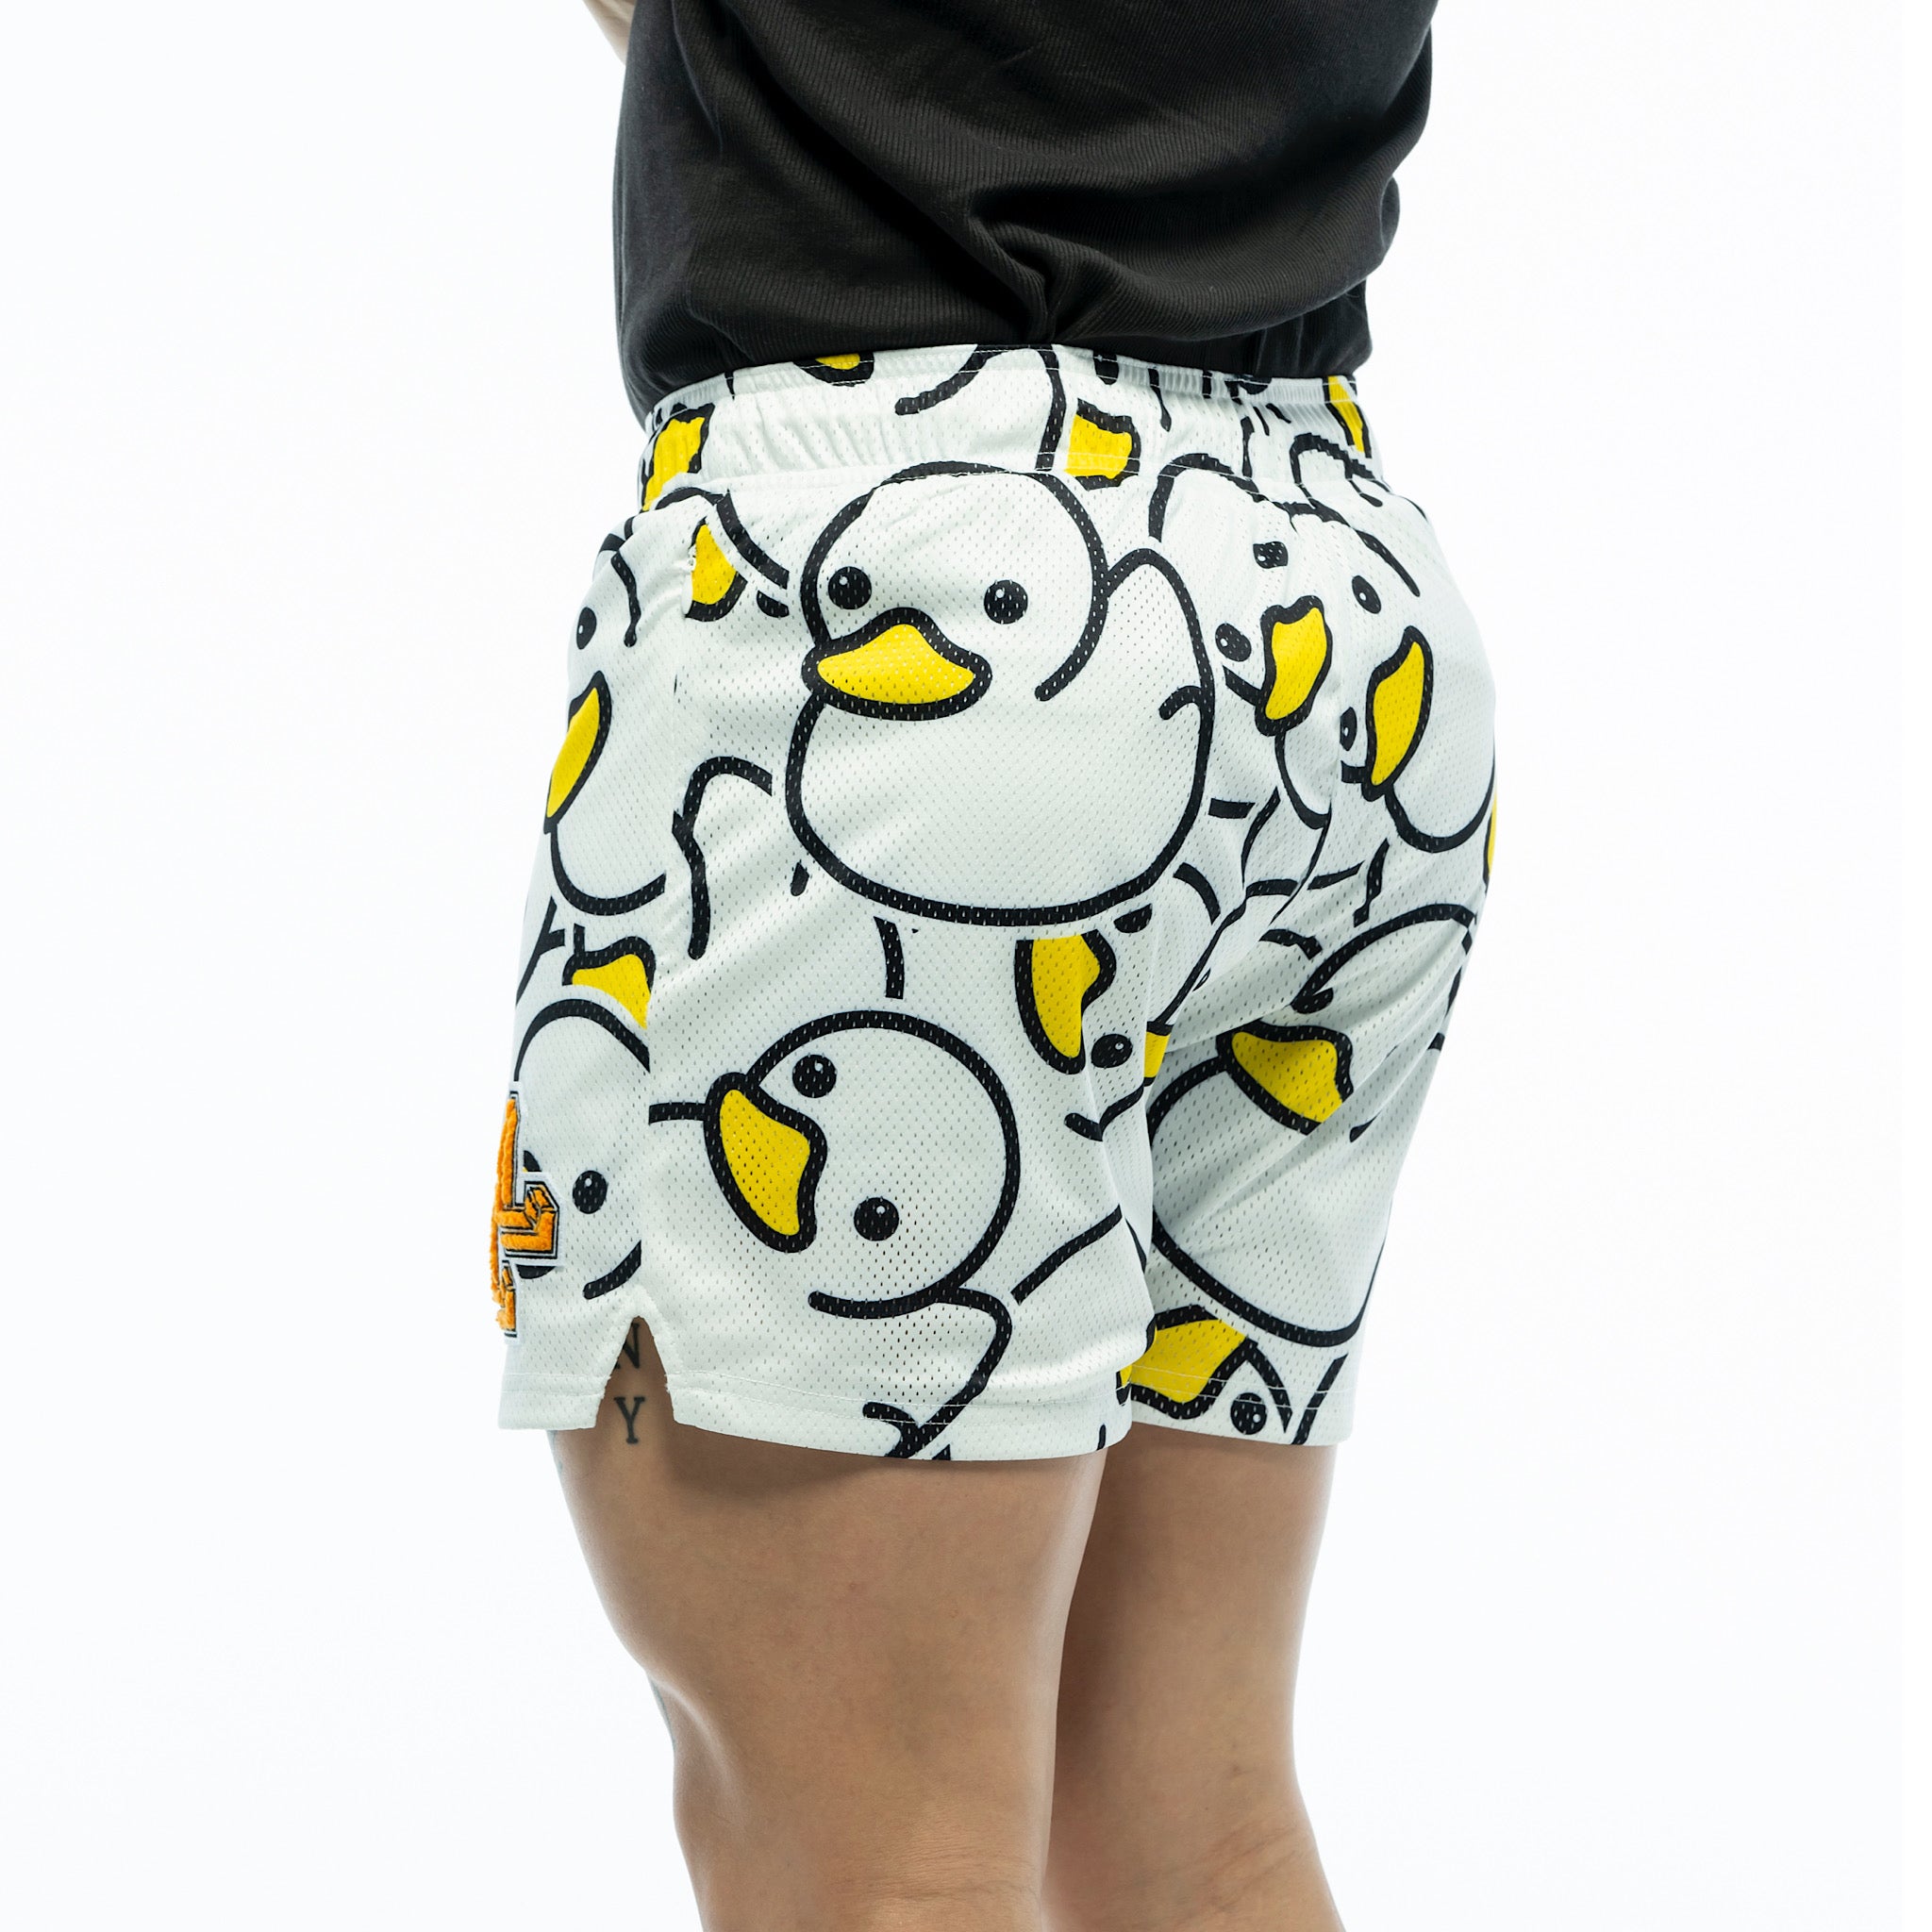 White Ducky workout shorts